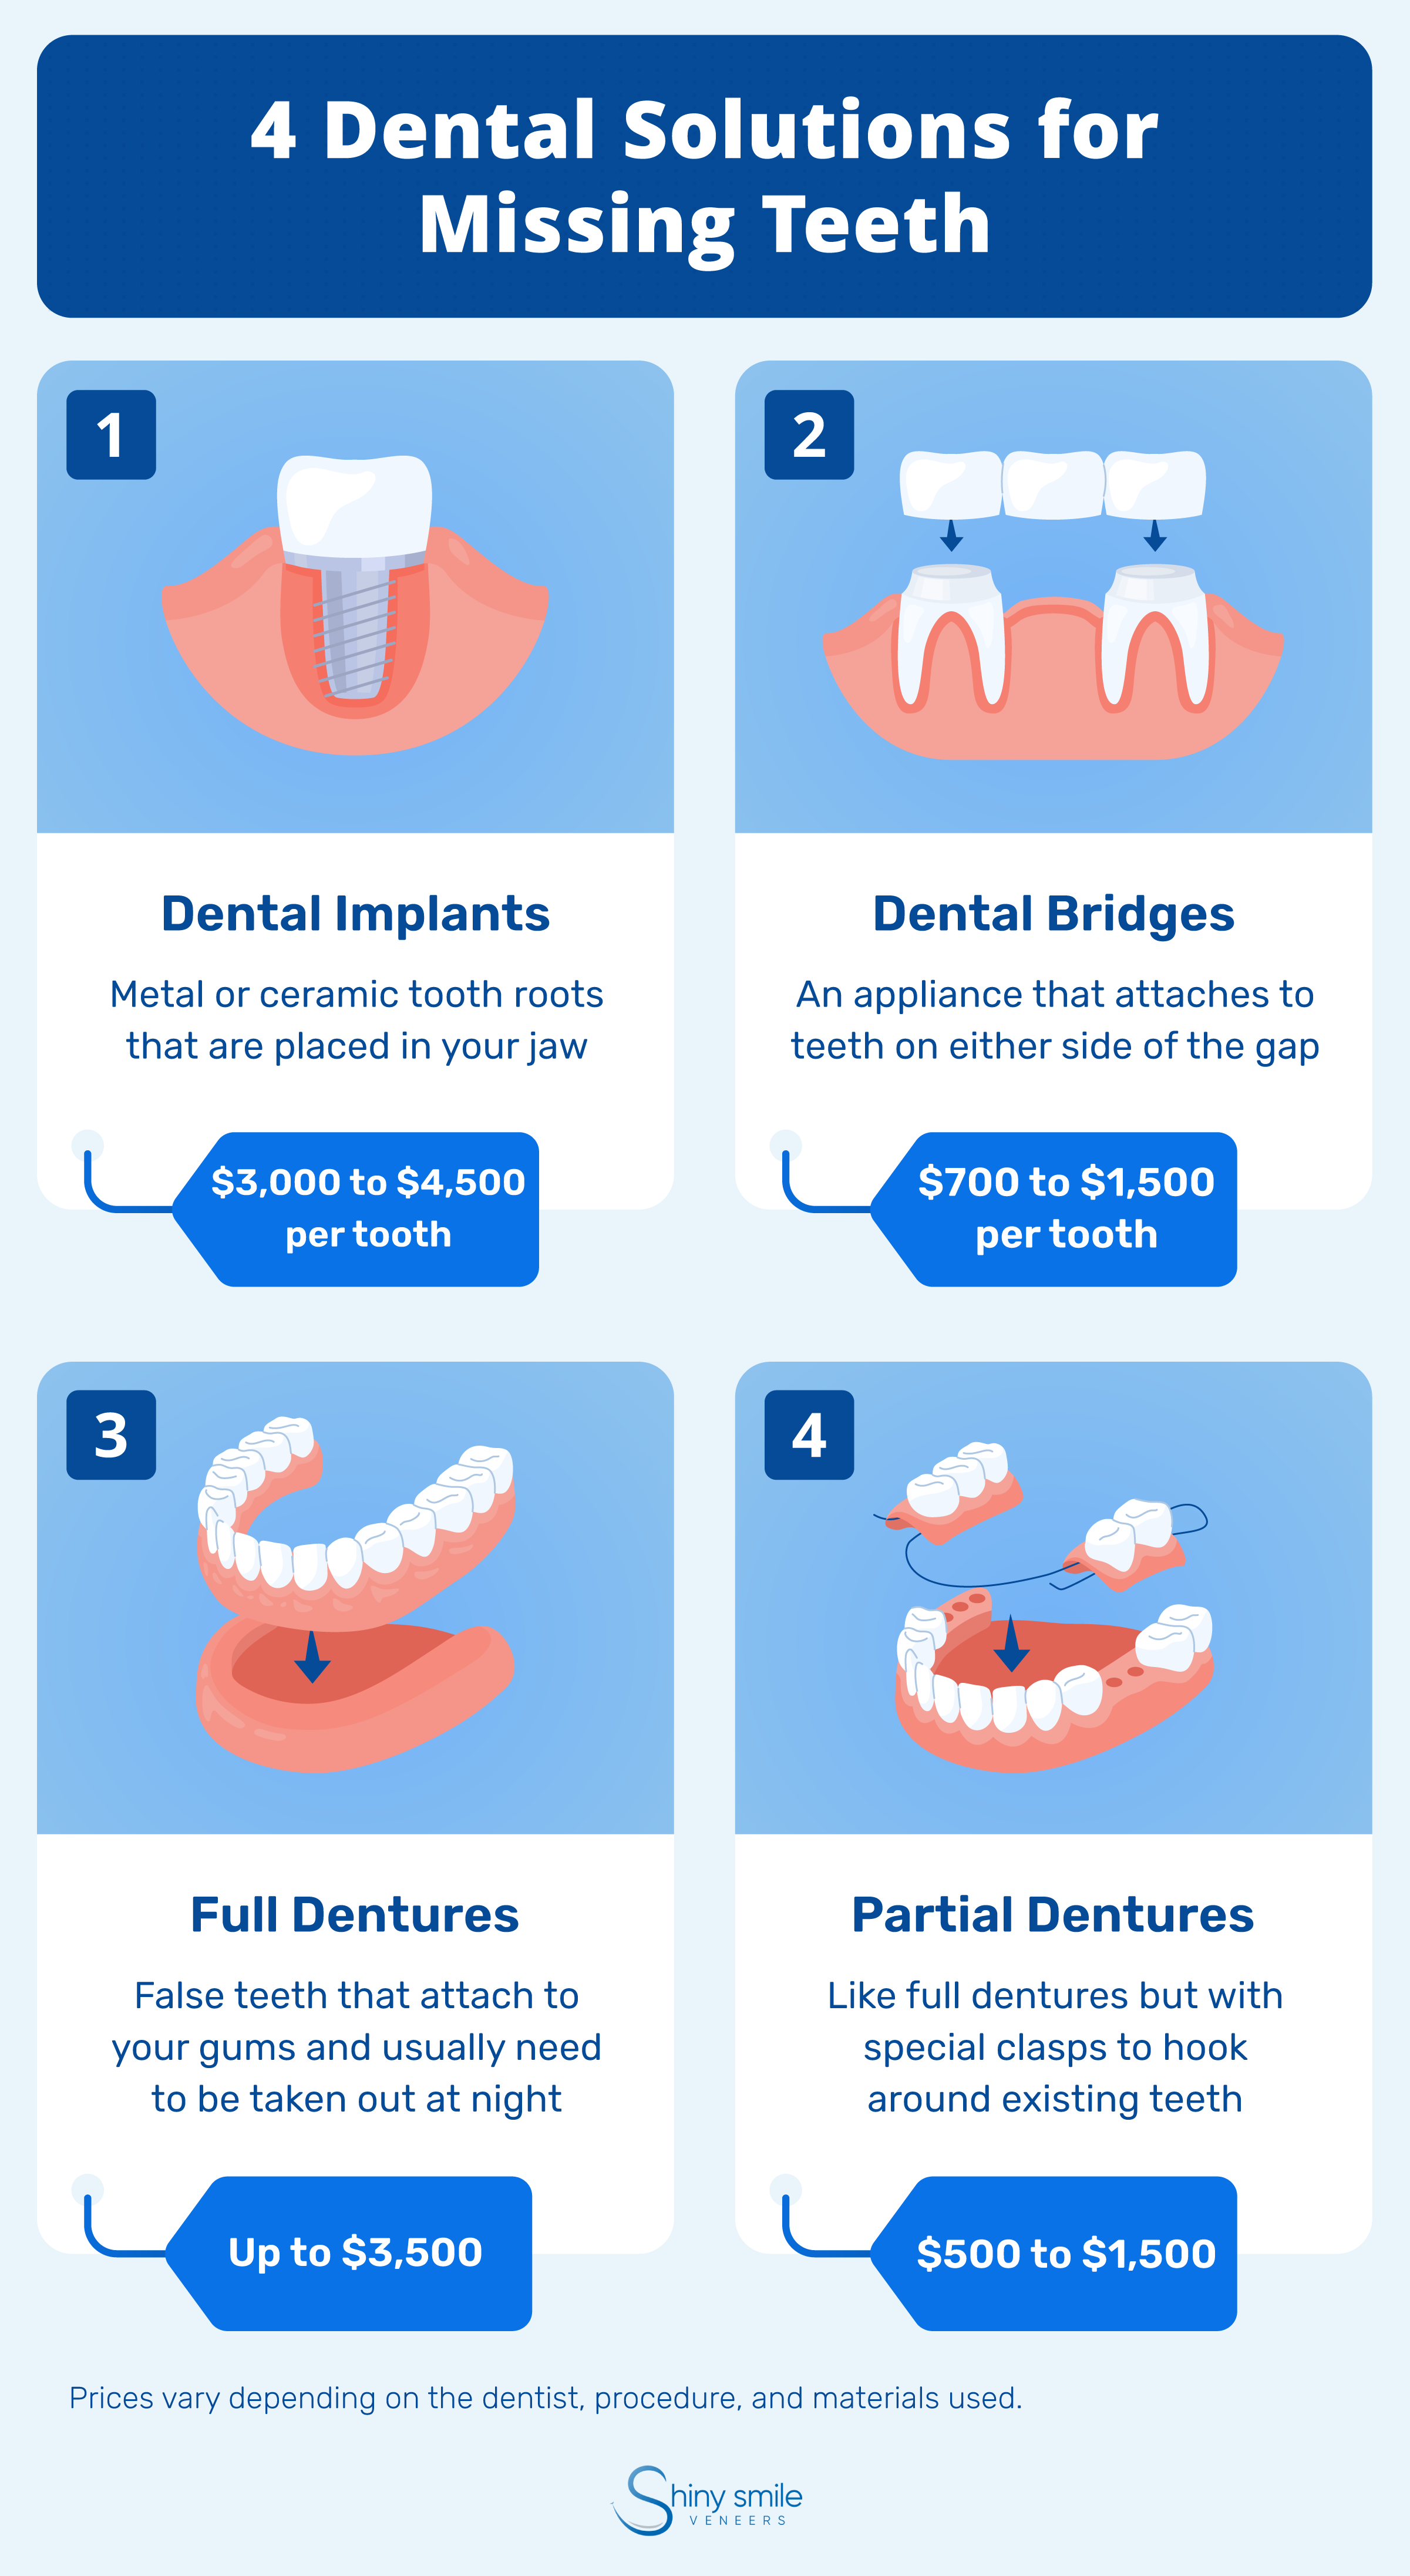 Four dental solutions for missing teeth